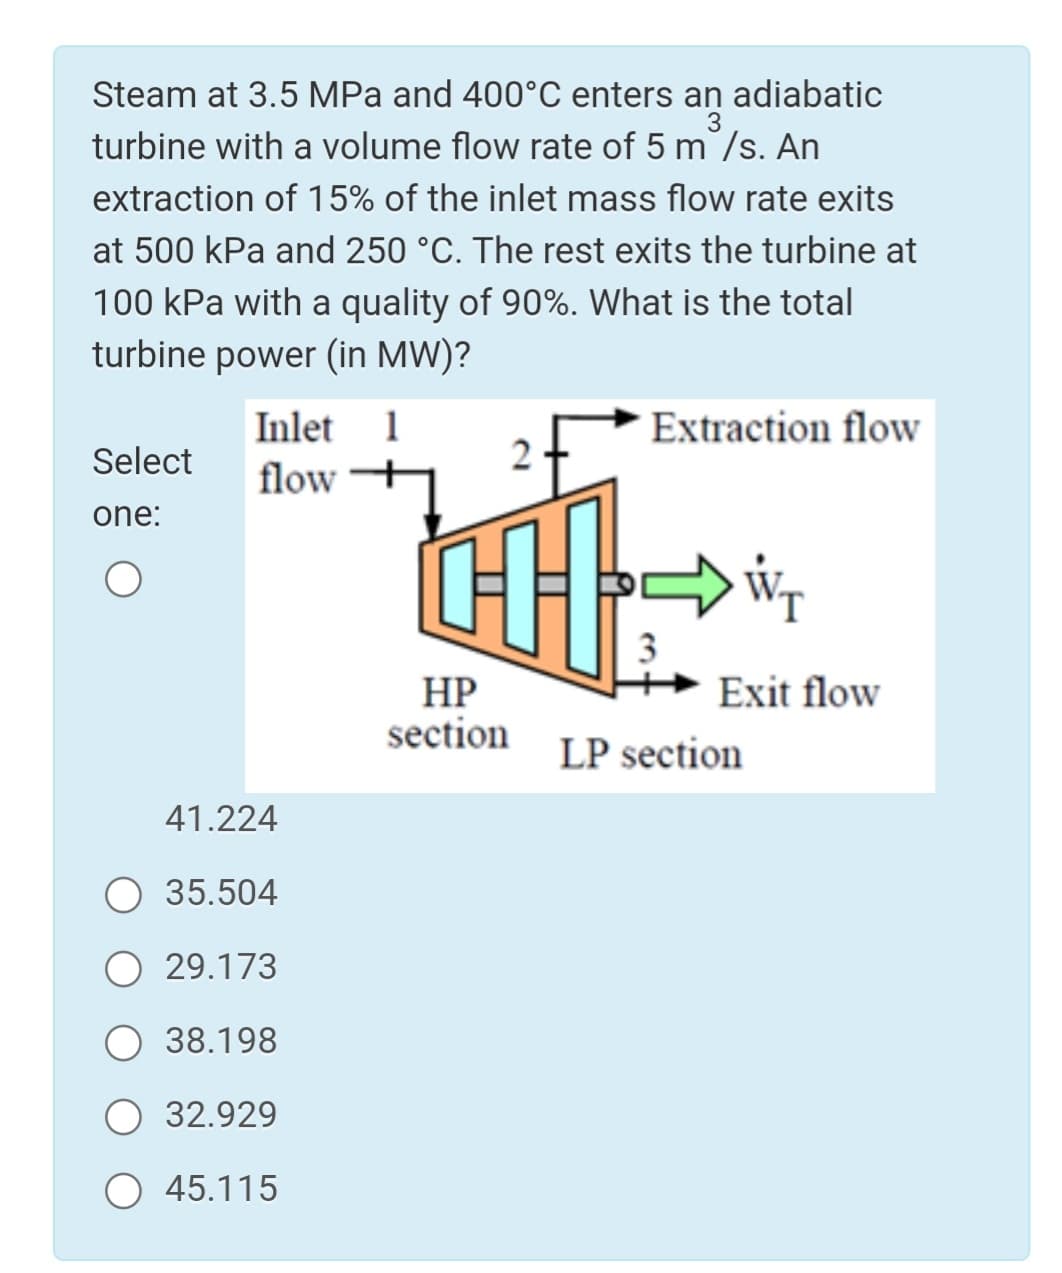 Steam at 3.5 MPa and 400°C enters an adiabatic
turbine with a volume flow rate of 5 m /s. An
extraction of 15% of the inlet mass flow rate exits
at 500 kPa and 250 °C. The rest exits the turbine at
100 kPa with a quality of 90%. What is the total
turbine power (in MW)?
Inlet 1
flow
Extraction flow
Select
one:
3
Exit flow
НР
section
LP section
41.224
35.504
29.173
O 38.198
O 32.929
О 45.115
